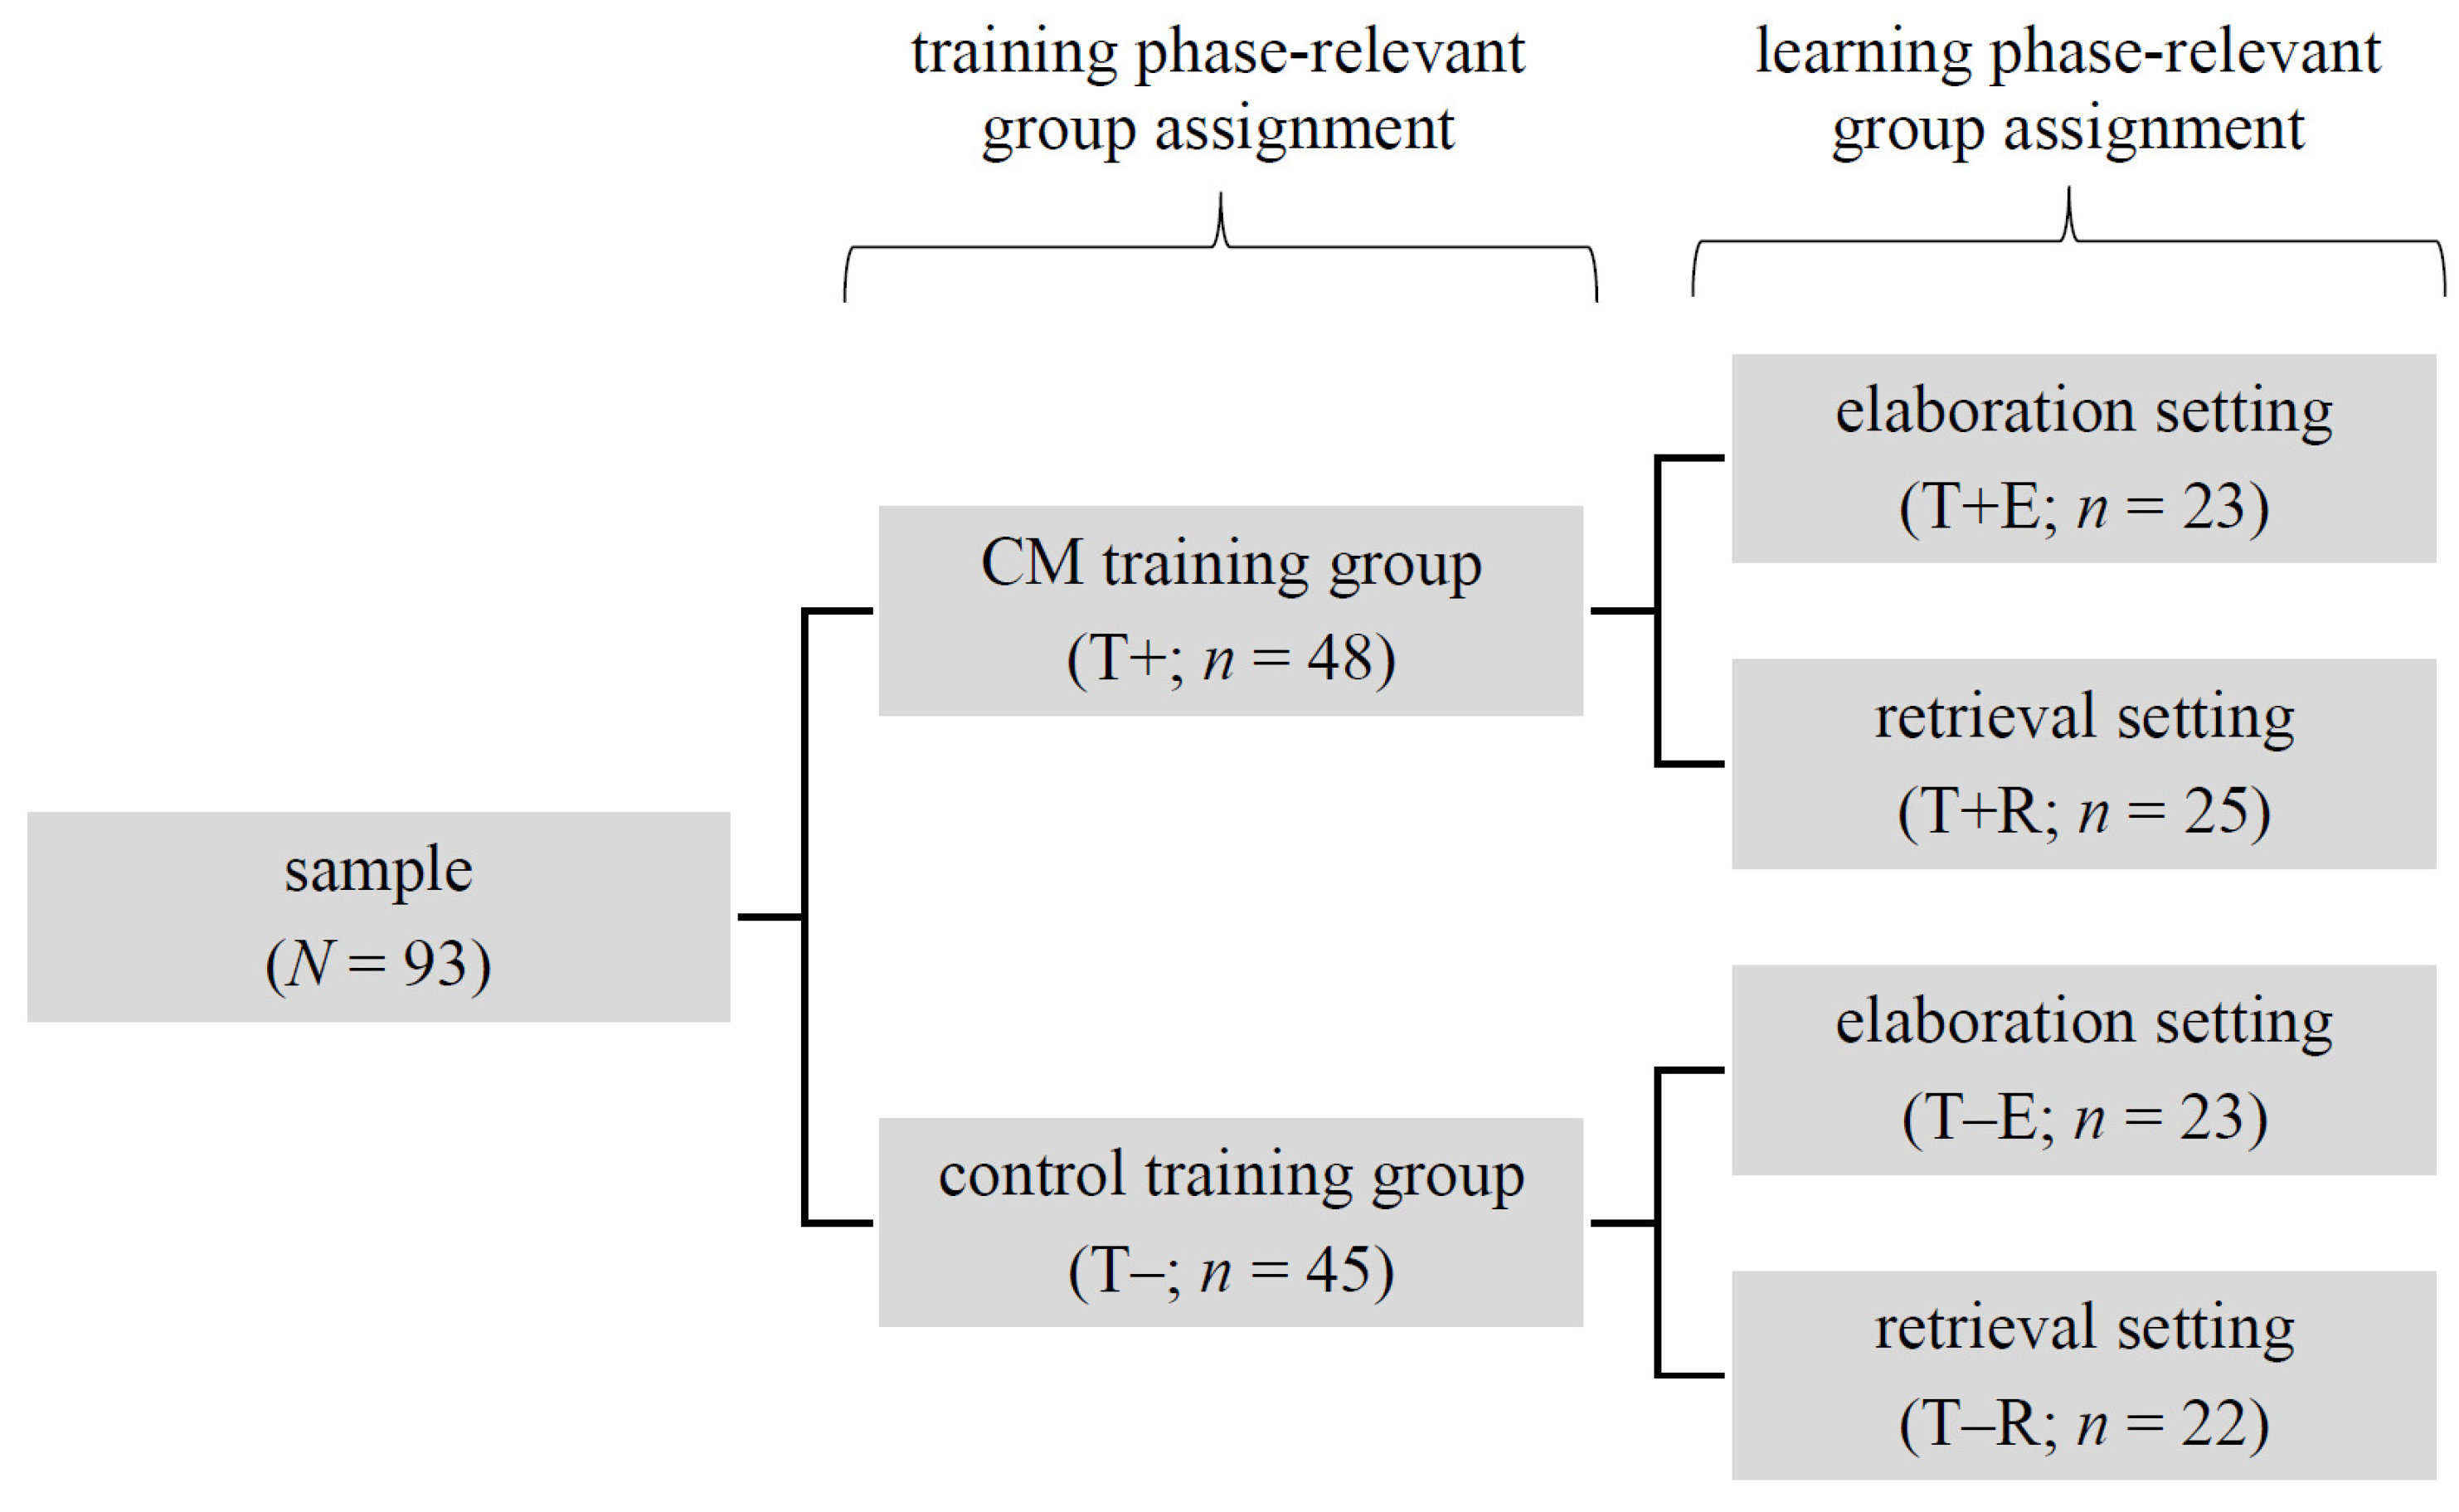 Education Sciences | Free Full-Text | Effects of Strategy Training and  Elaboration vs. Retrieval Settings on Learning of Cell Biology Using  Concept Mapping | HTML